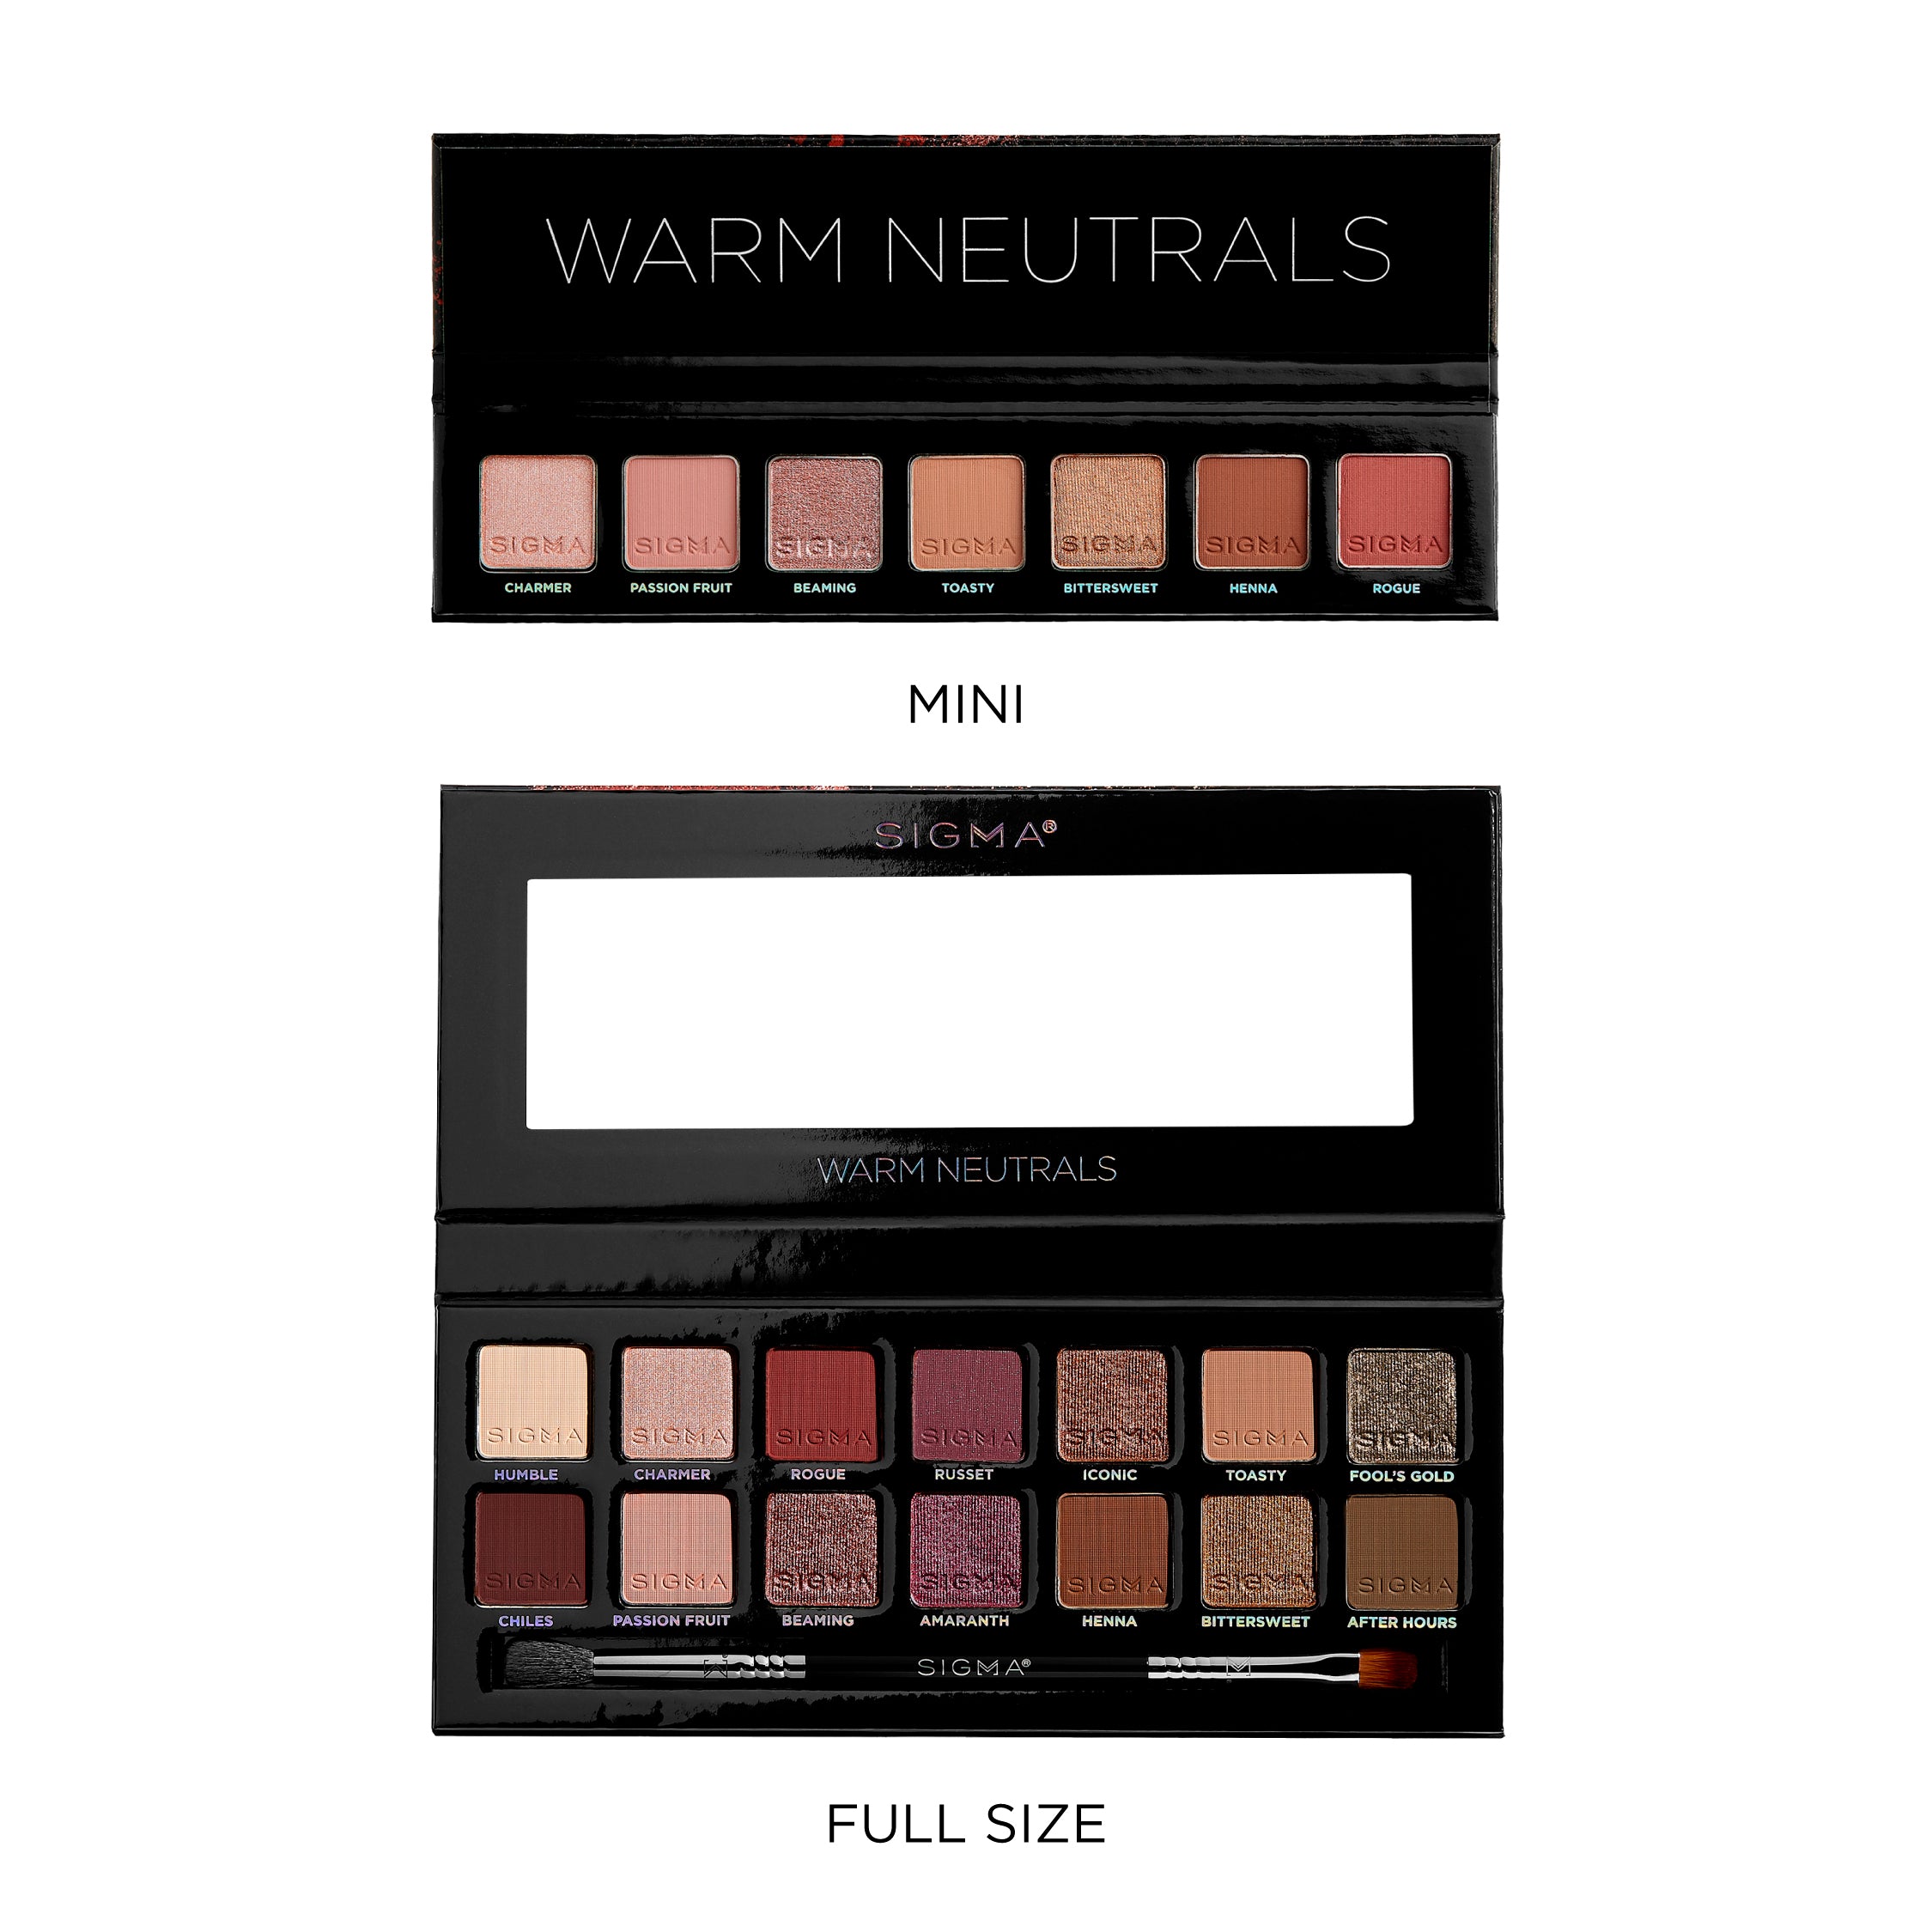 Warm Neutrals Eyeshadow Palettes Mini and Full Size compared 